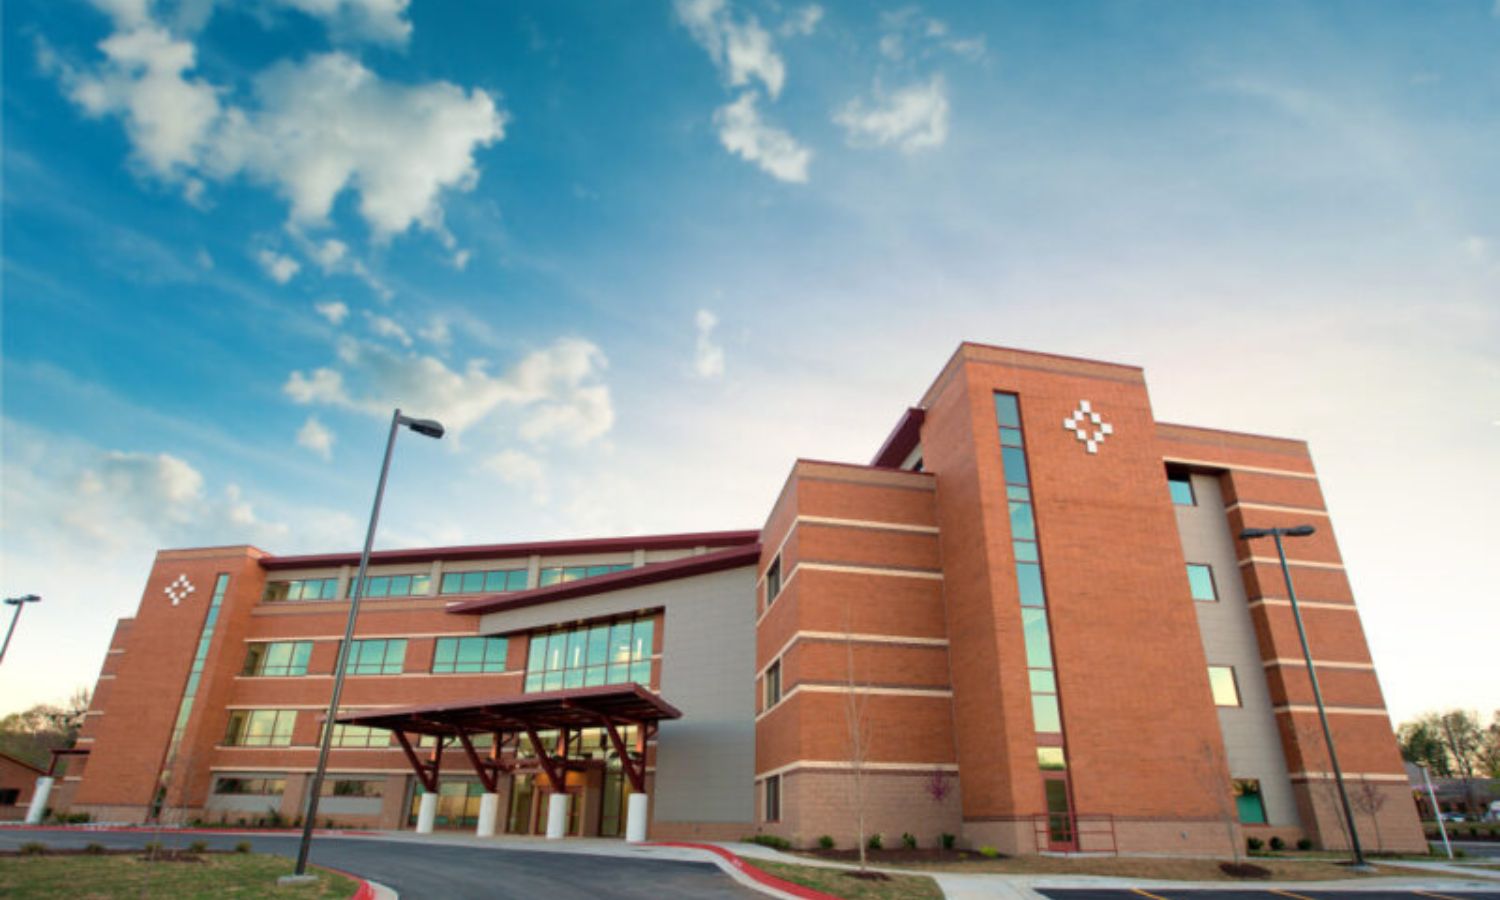 This Hospital Has Been Named the Best Healthcare Provider in Washington